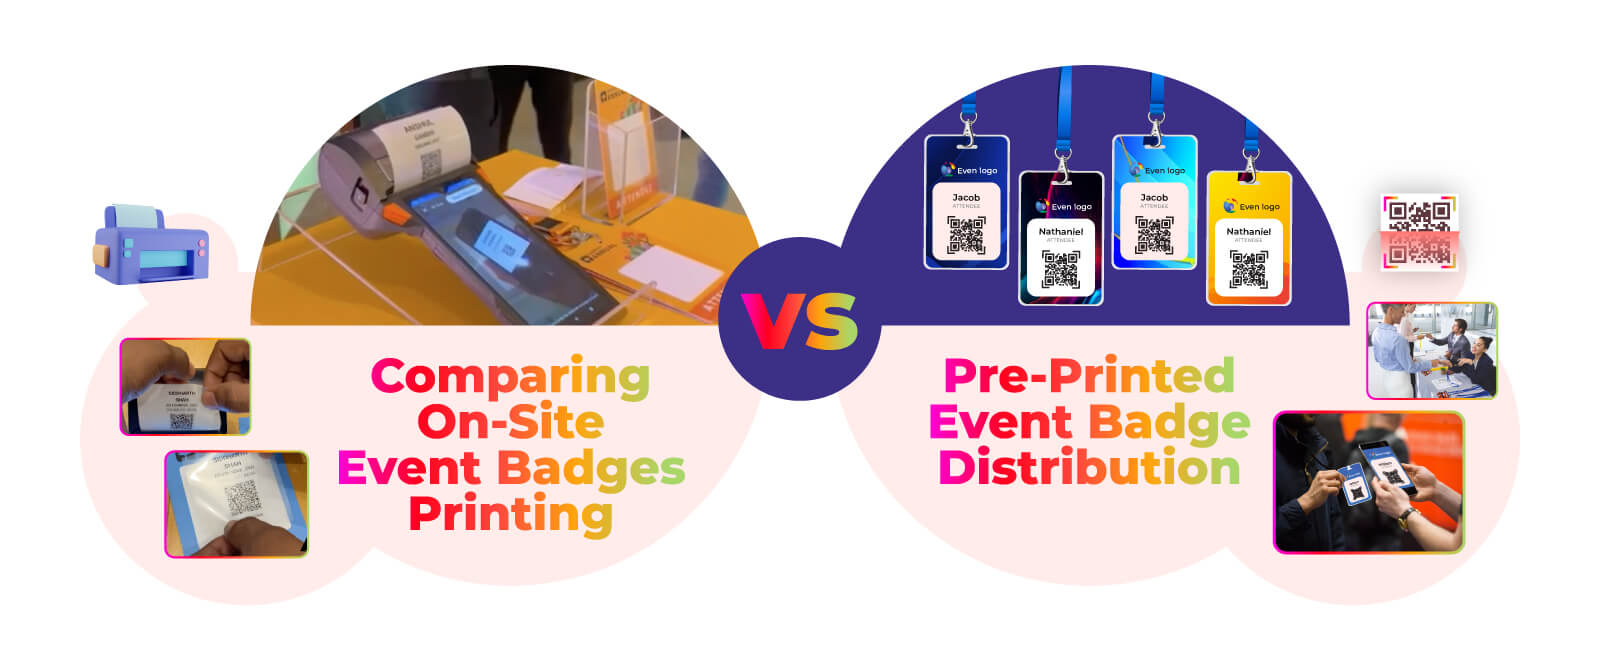 Comparing On-Site Event Badges Printing vs. Pre-Printed Event Badge Distribution